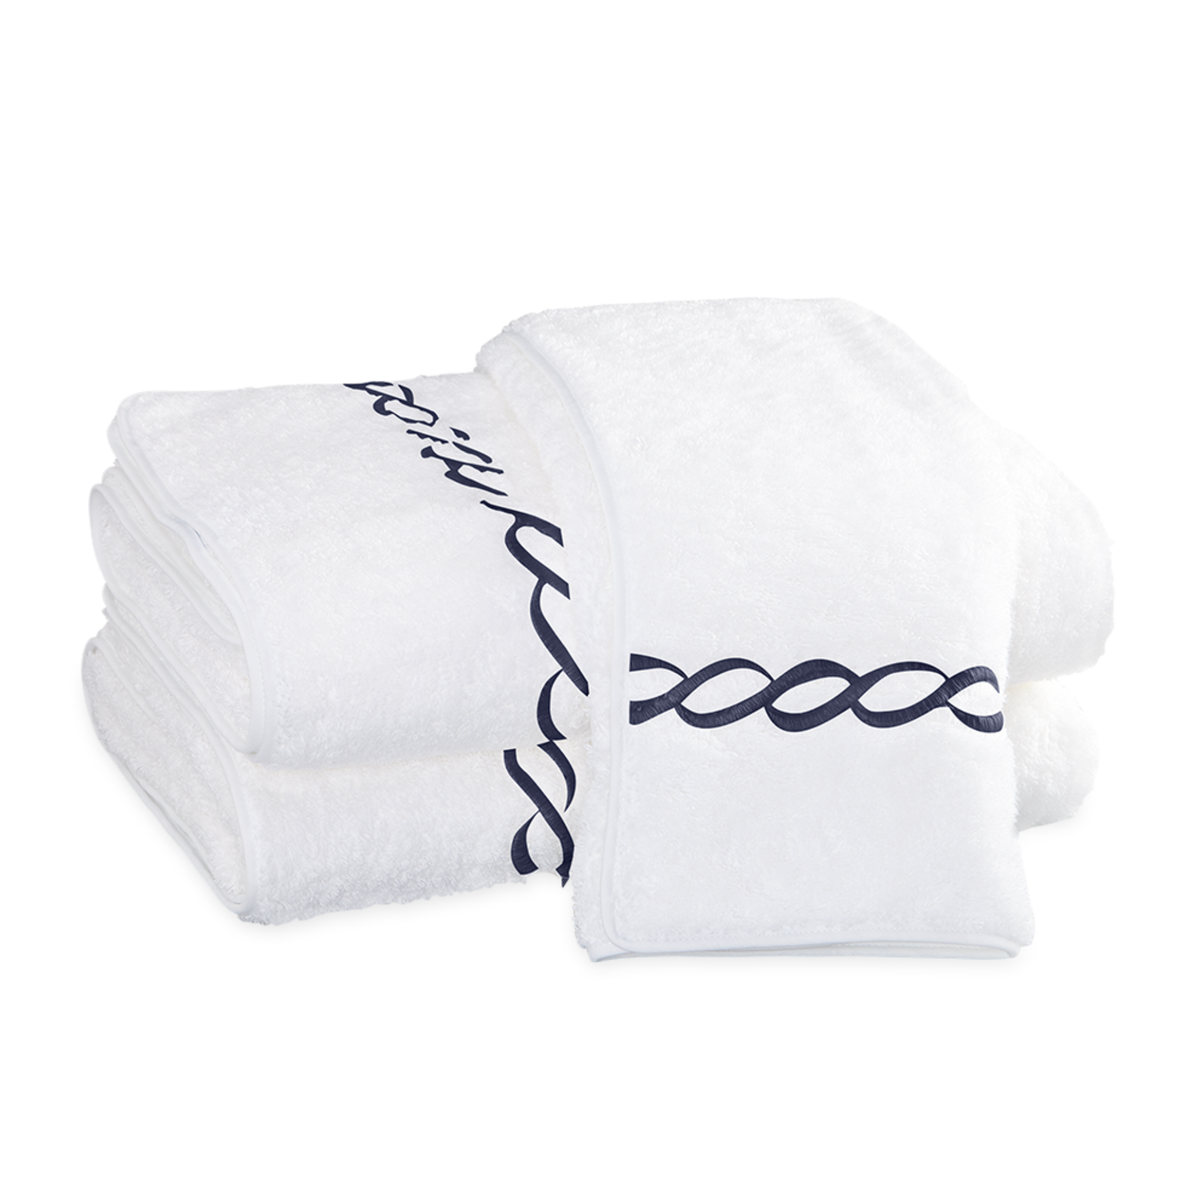 Folded Matouk Classic Chain Bath Towels in Color Navy